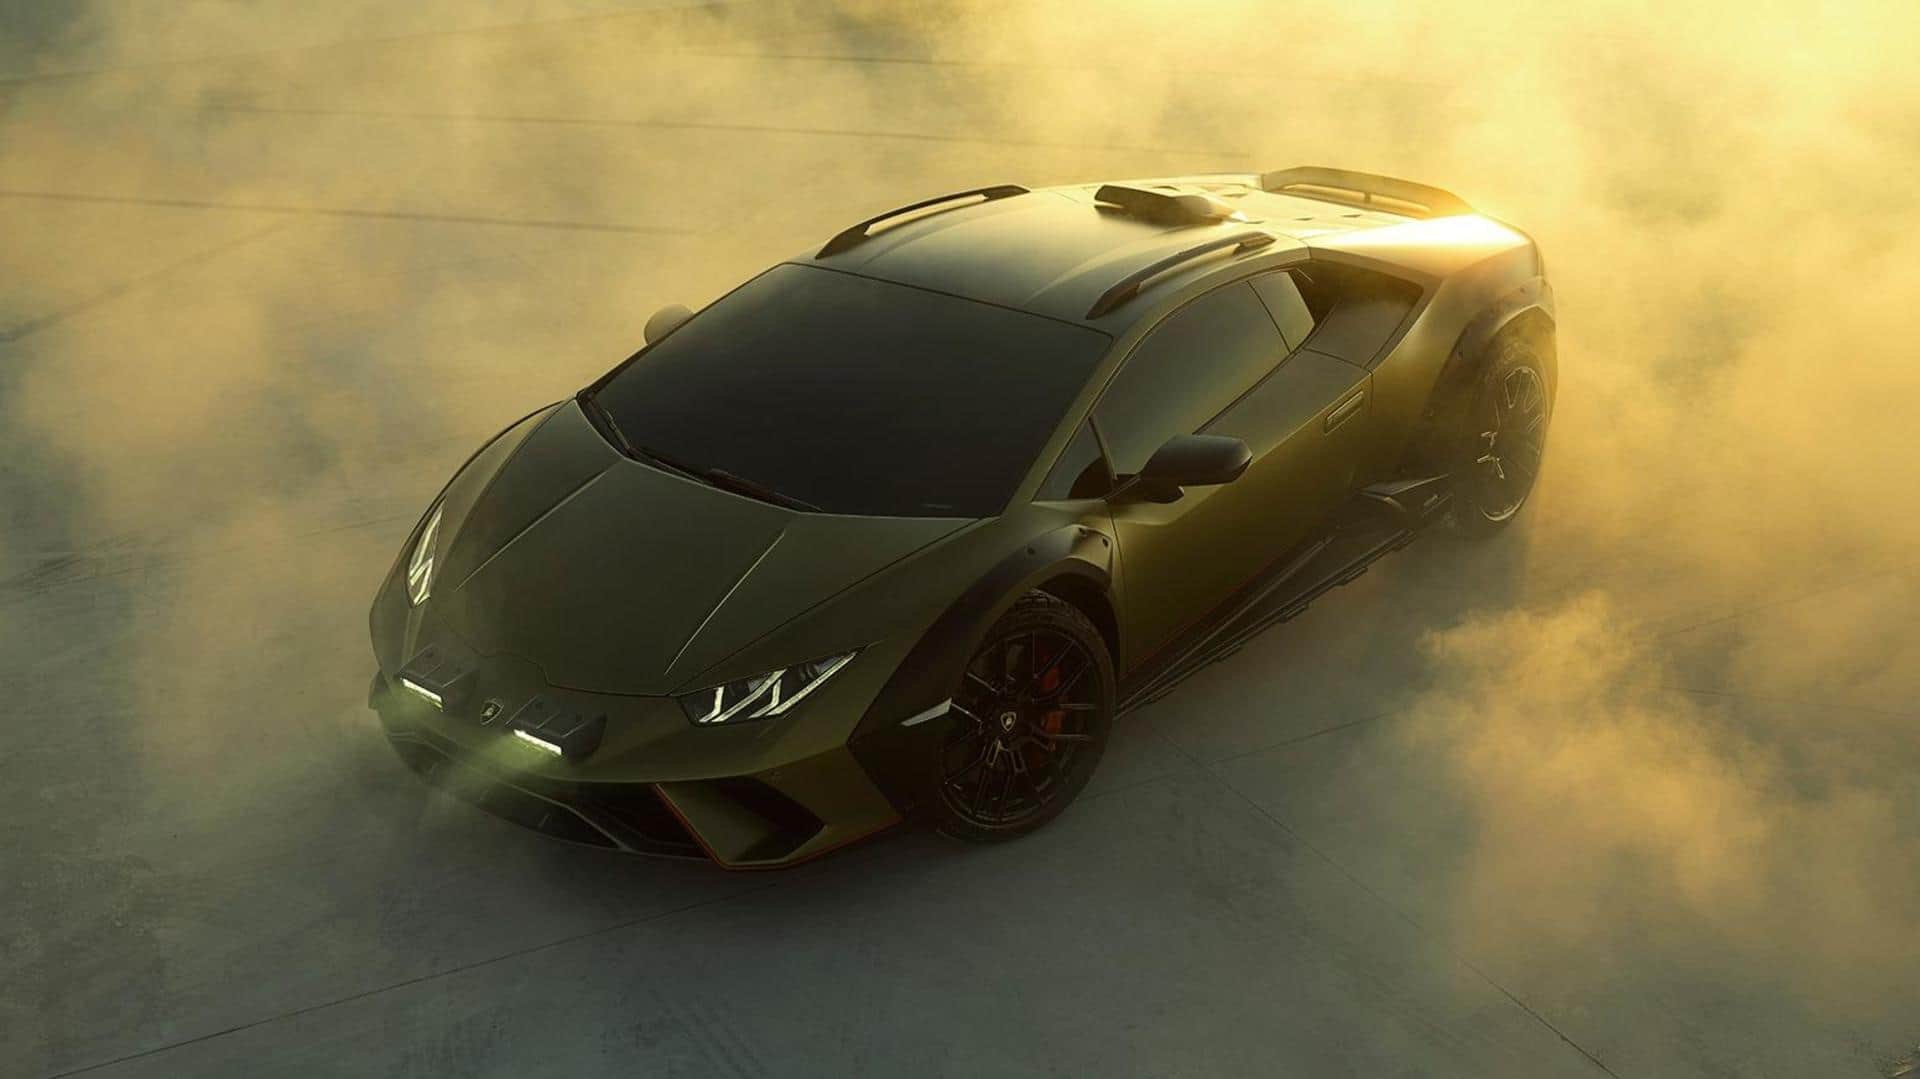 Prior to debut, Lamborghini Huracan Sterrato previewed in official images